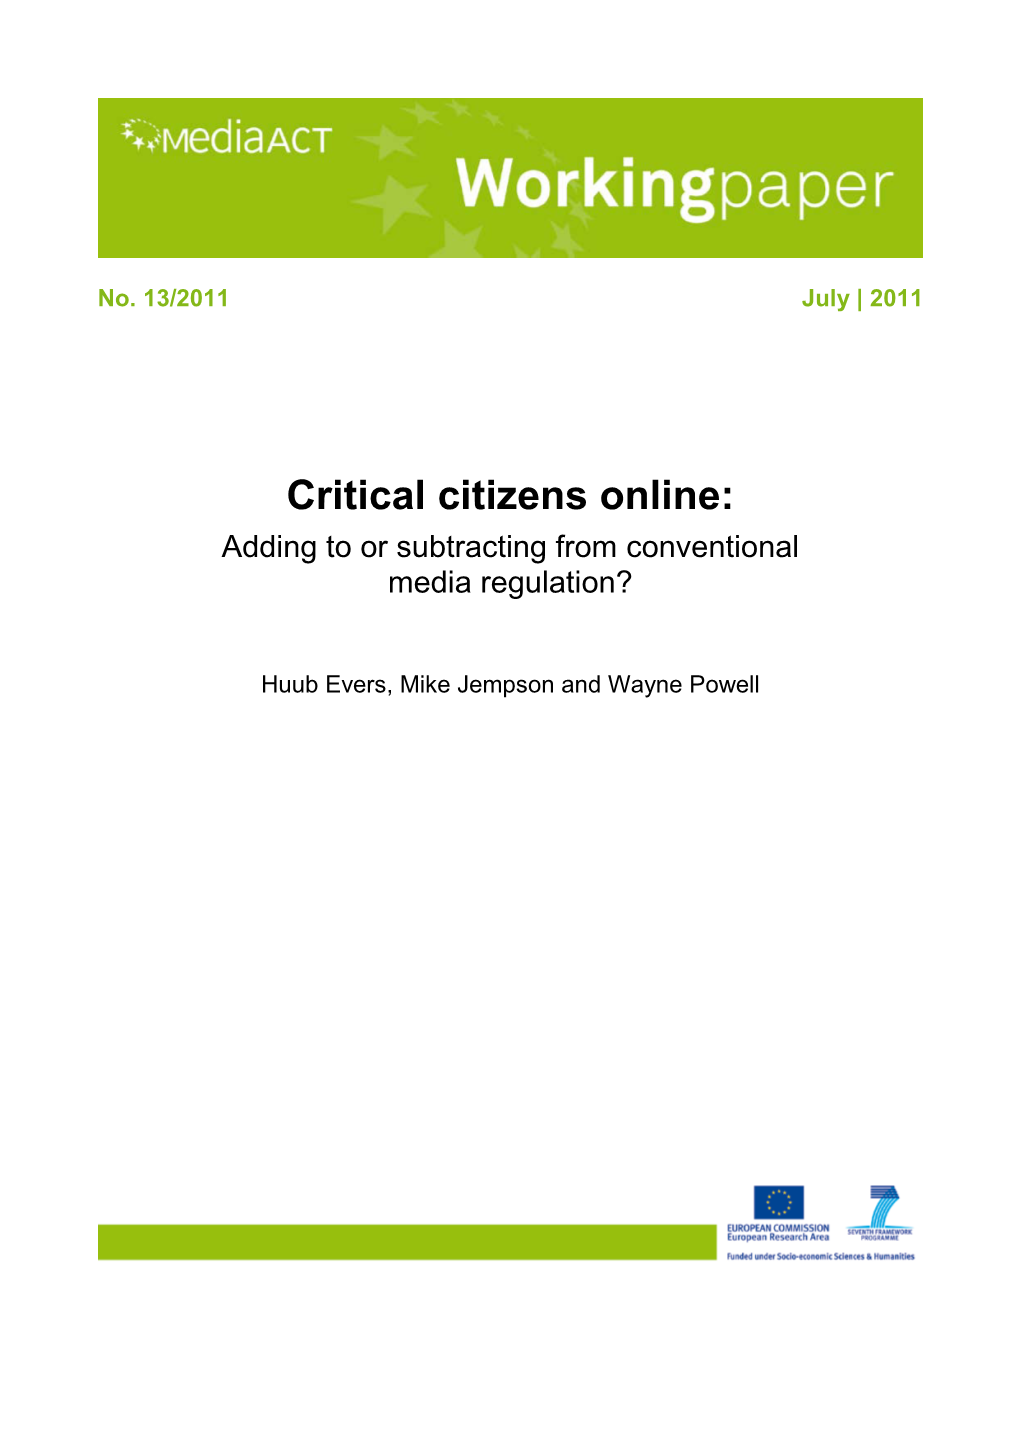 Critical Citizens Online: Adding to Or Subtracting from Conventional Media Regulation?